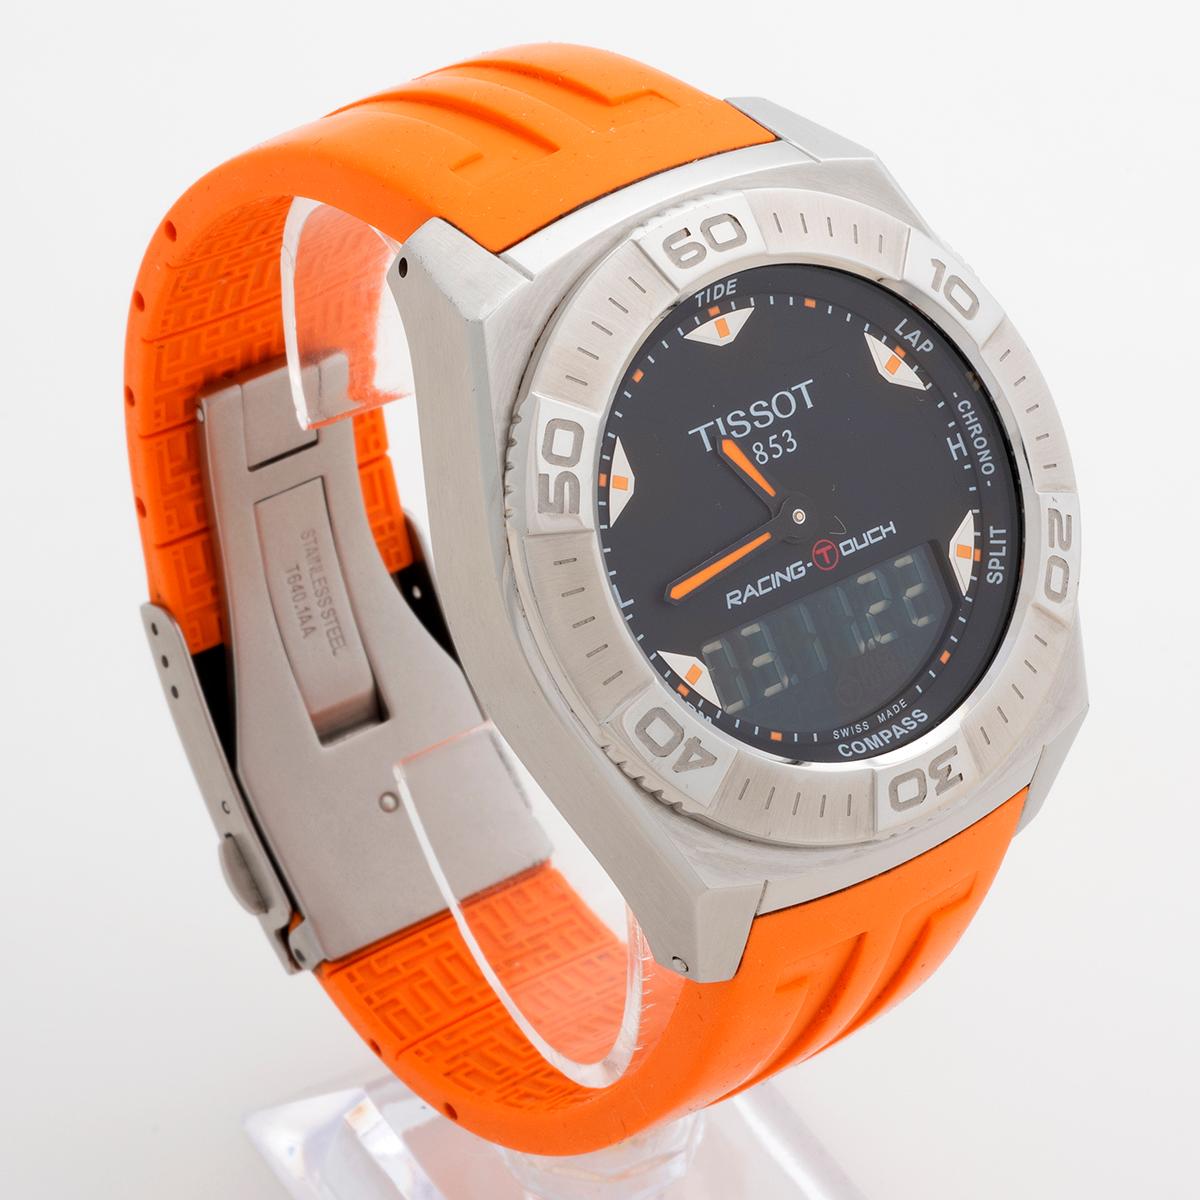 Our iconic Tissot T Touch Racing features a 40mm steel case with black / orange dial and orange rubber strap with steel clasp. This version of reference T002520A is discontinued and was made famous as regularly worn by Top Gear / Grand Tour